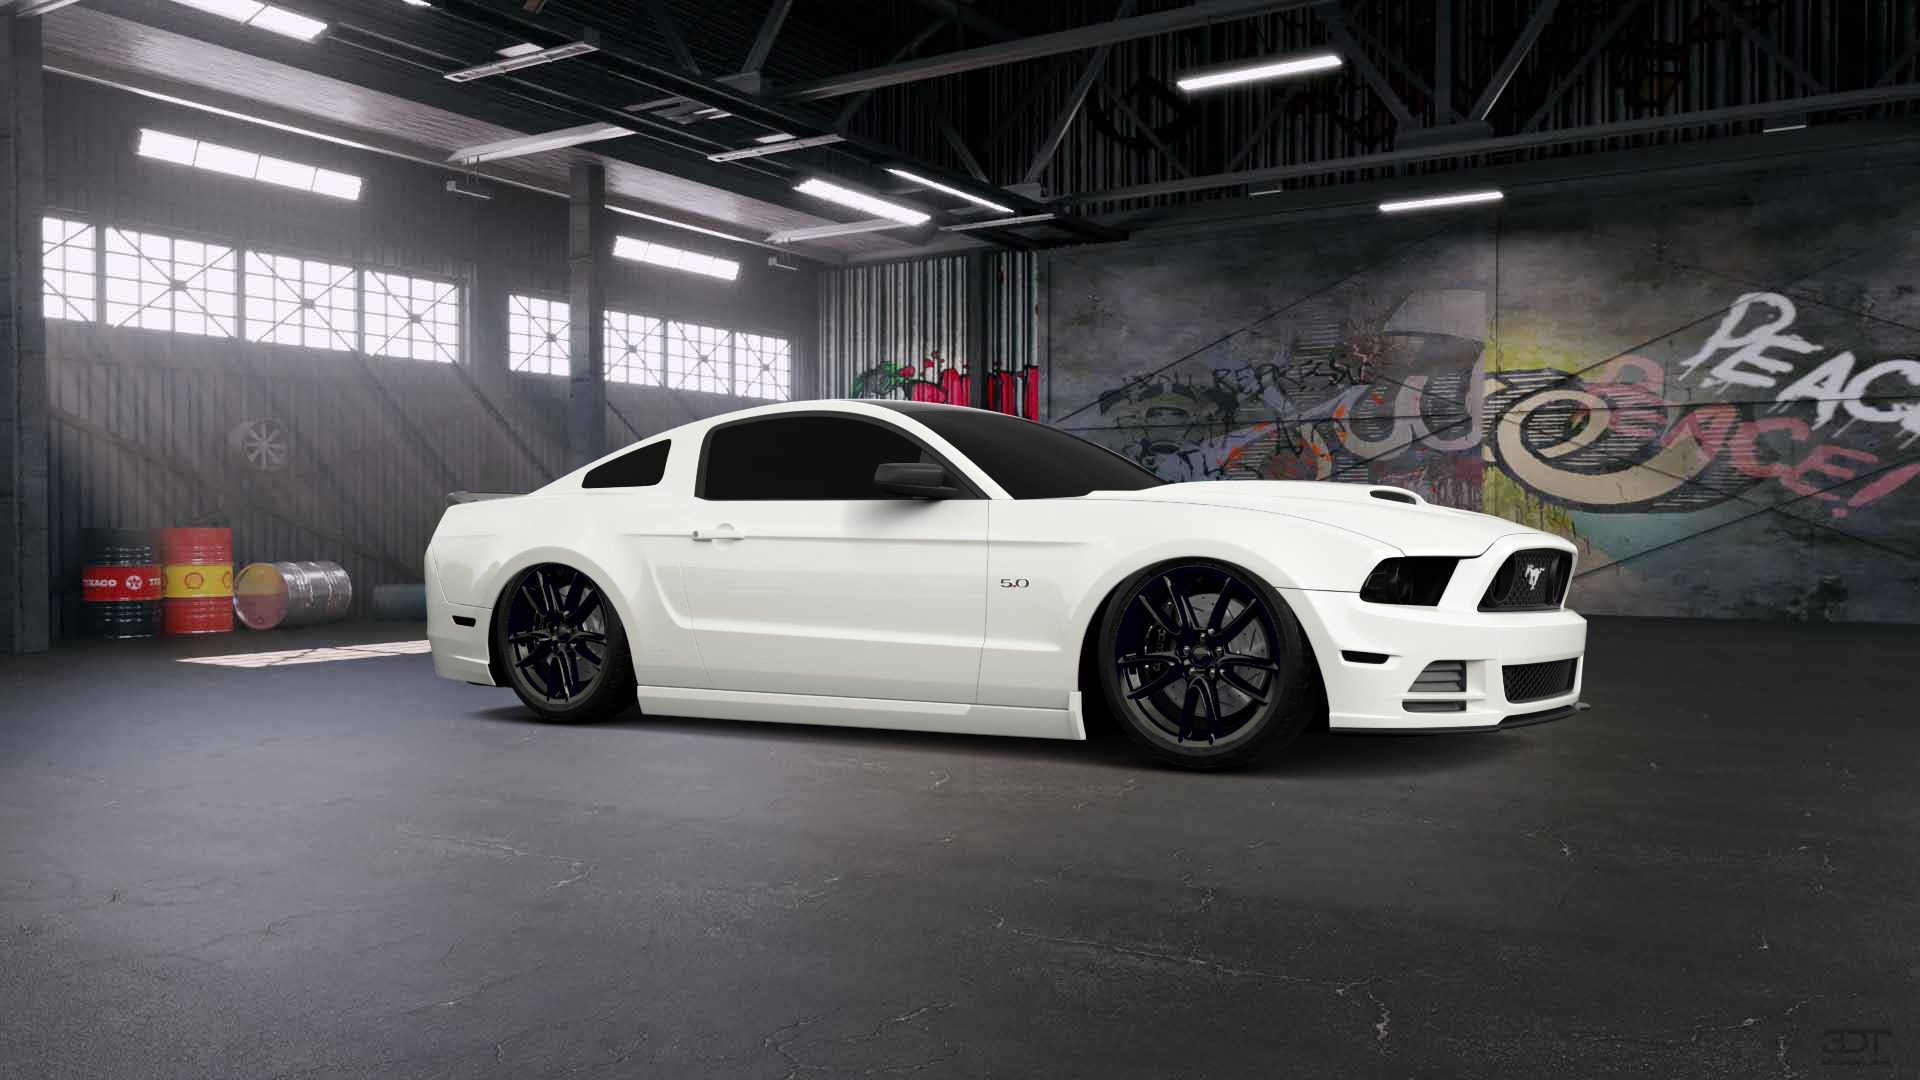 Ford Mustang 2 Door Coupe 2013